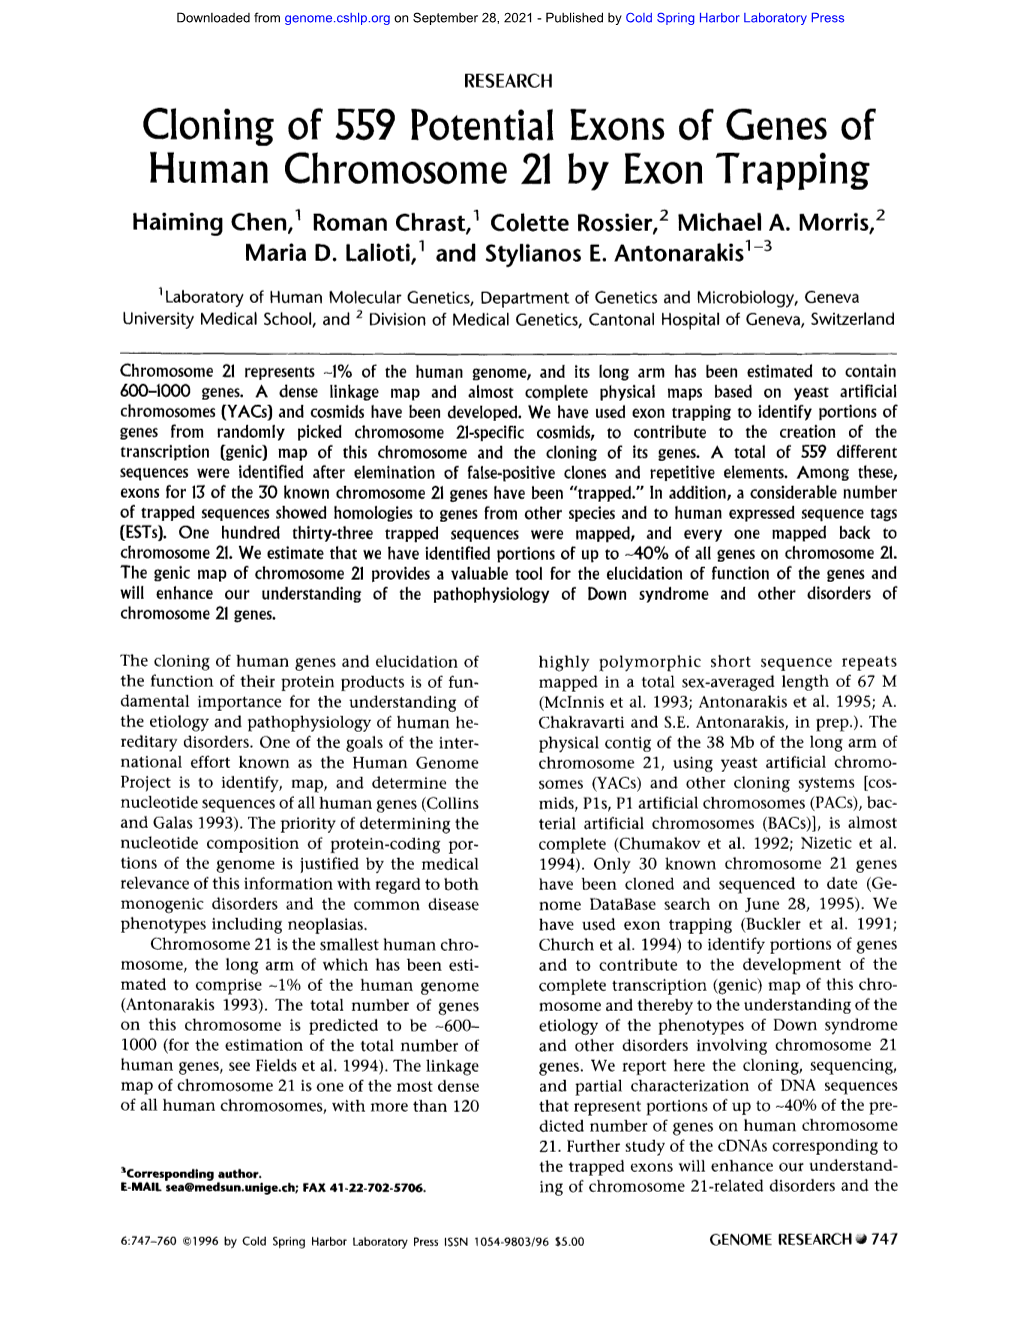 Cloning of 559 Potential Exons of Genes of Human Chromosome 21 by Exon Trapping Haiming Chen, Roman Chrast, Colette Rossier, 2 Michael A